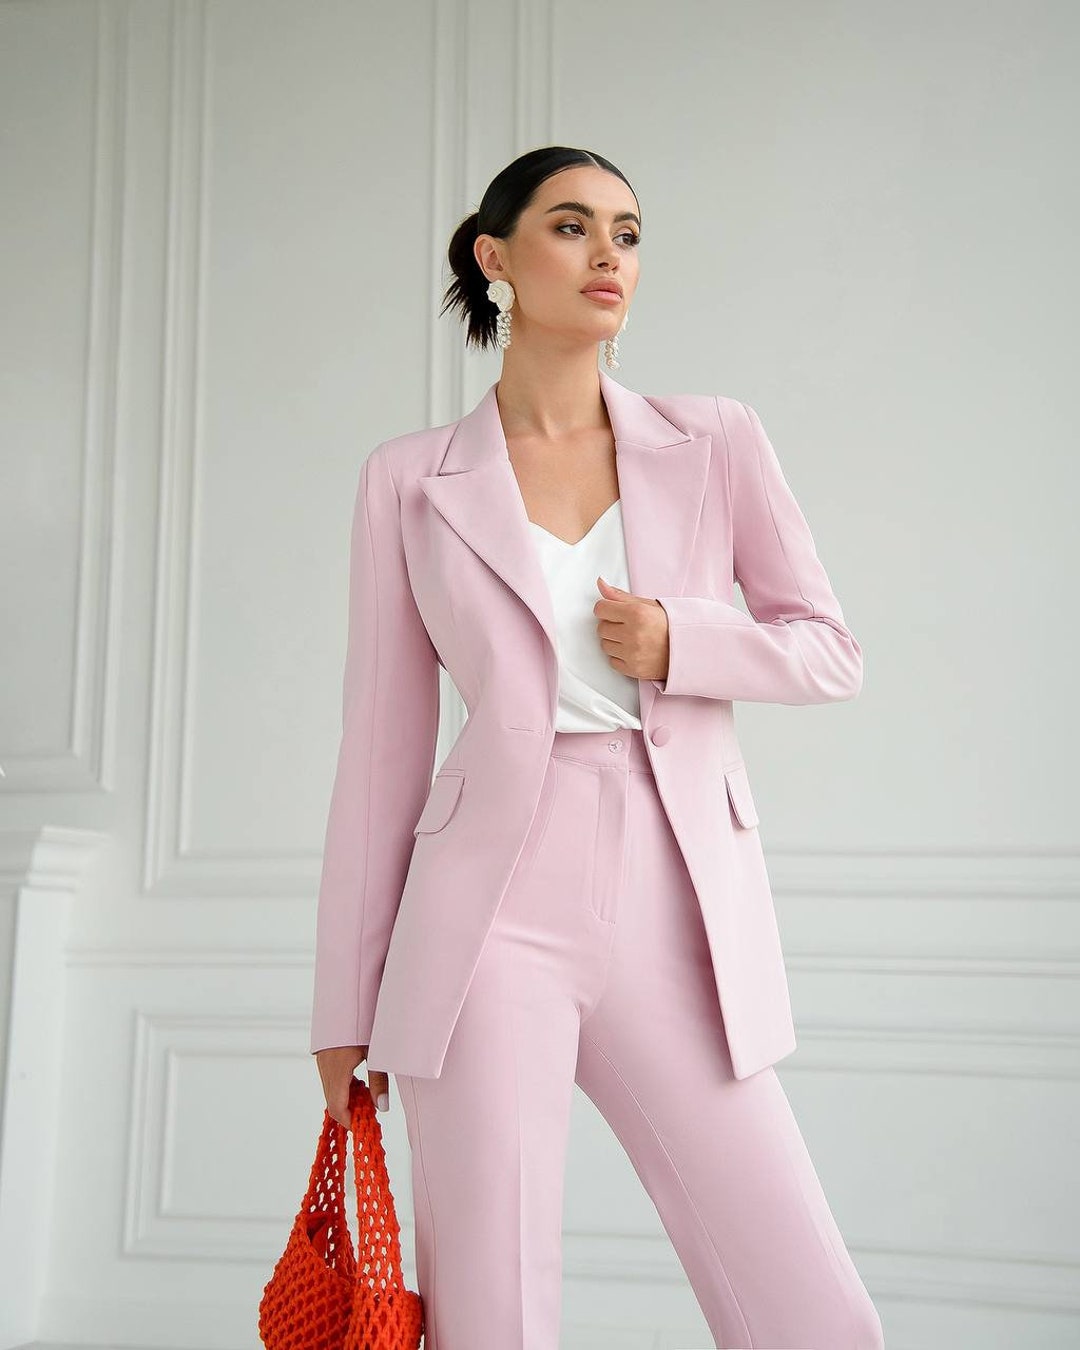 Dusty Pink Pantsuit for Women, Pink Formal Pantsuit for Office ...